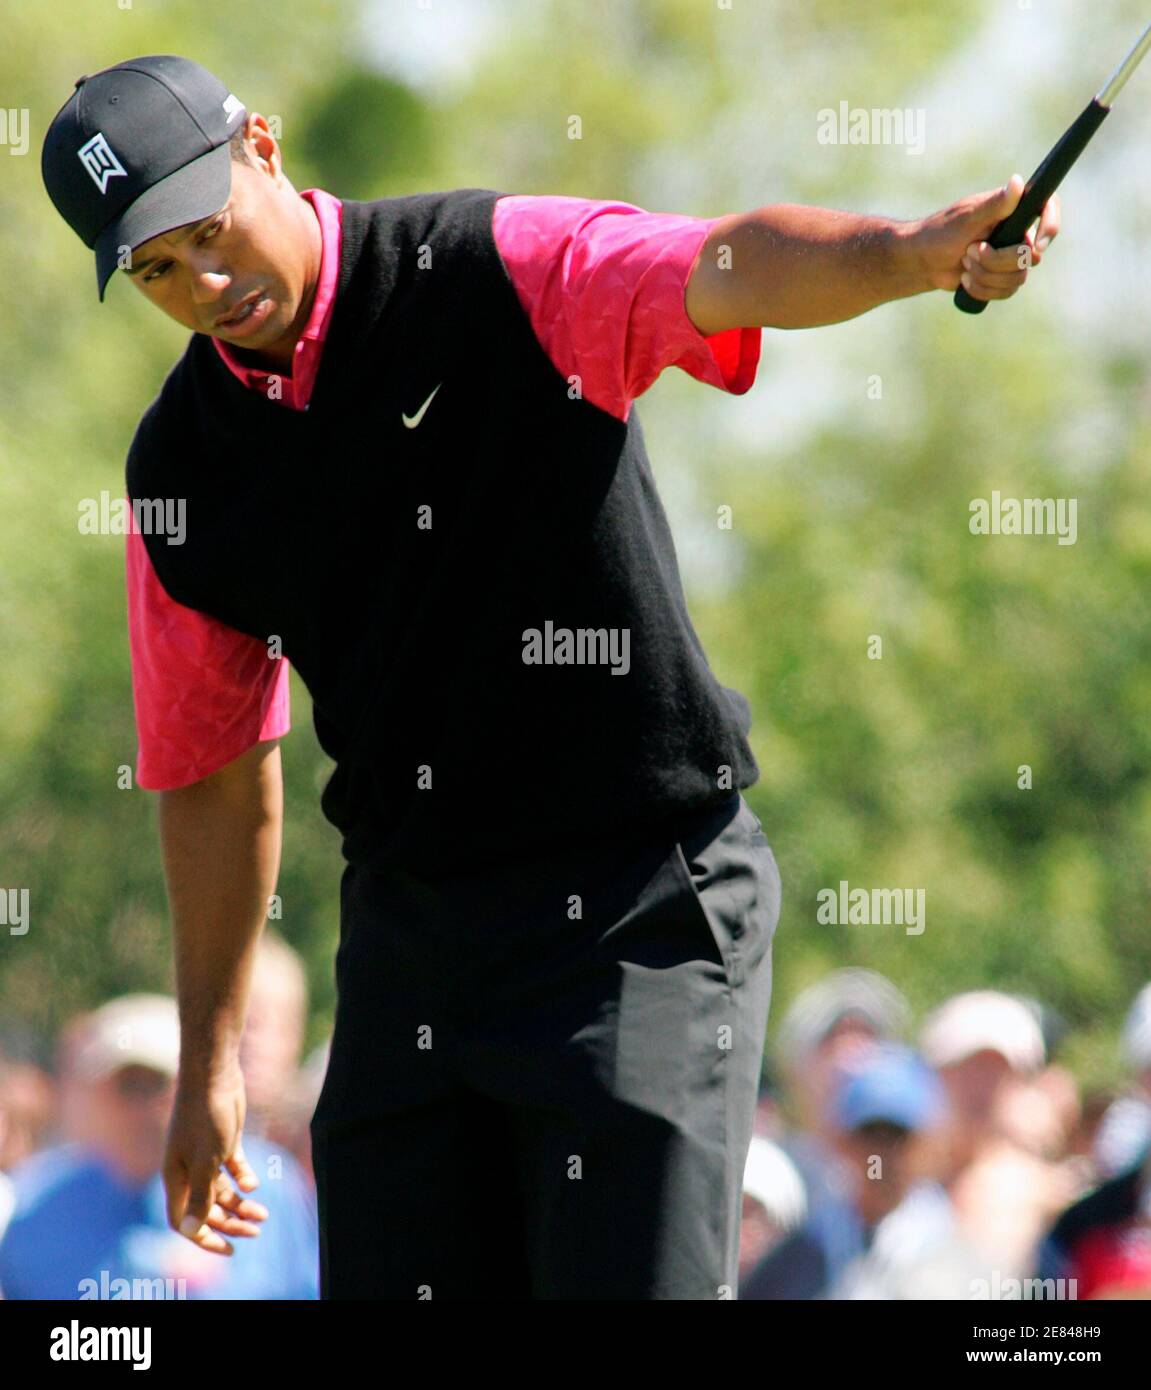 Tiger Woods reacts after making a putt for birdie on the first green during the fourth round of play at the Arnold Palmer Invitational golf tournament held at the Bay Hill Club in Orlando, Florida, March 18, 2007. REUTERS/Rick Fowler (UNITED STATES) Stock Photo